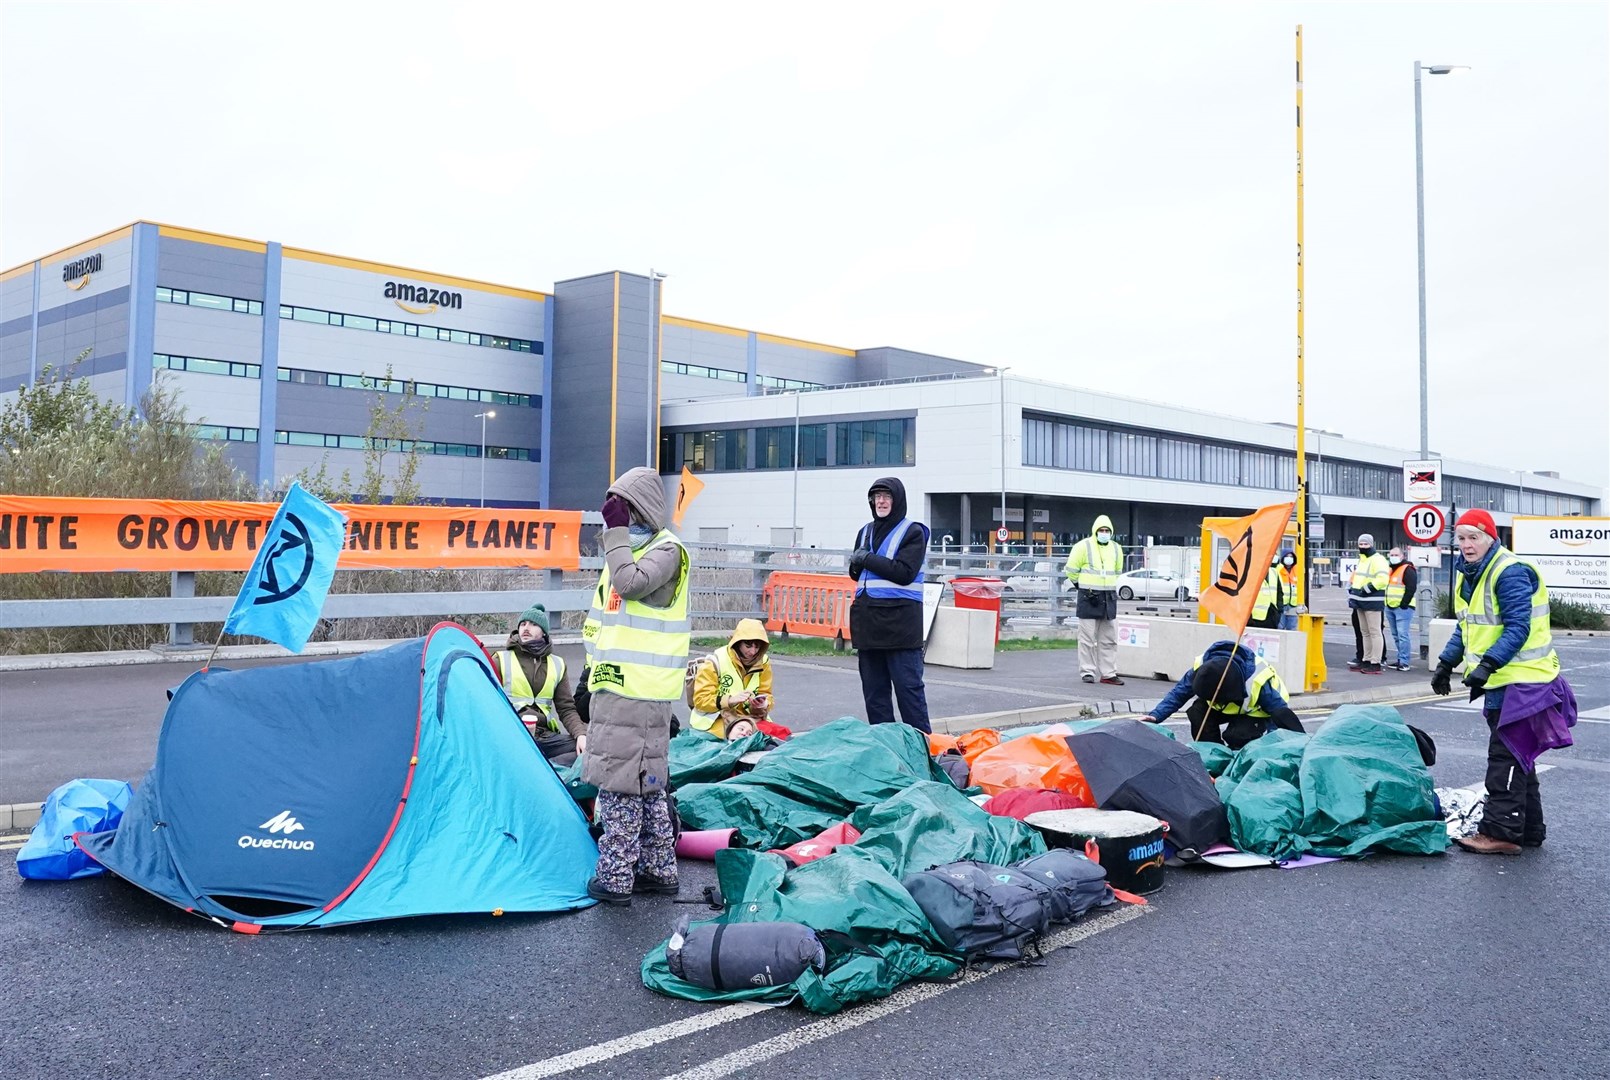 Activists block the entrance to the Amazon centre in Tilbury, Essex (Ian West/PA)